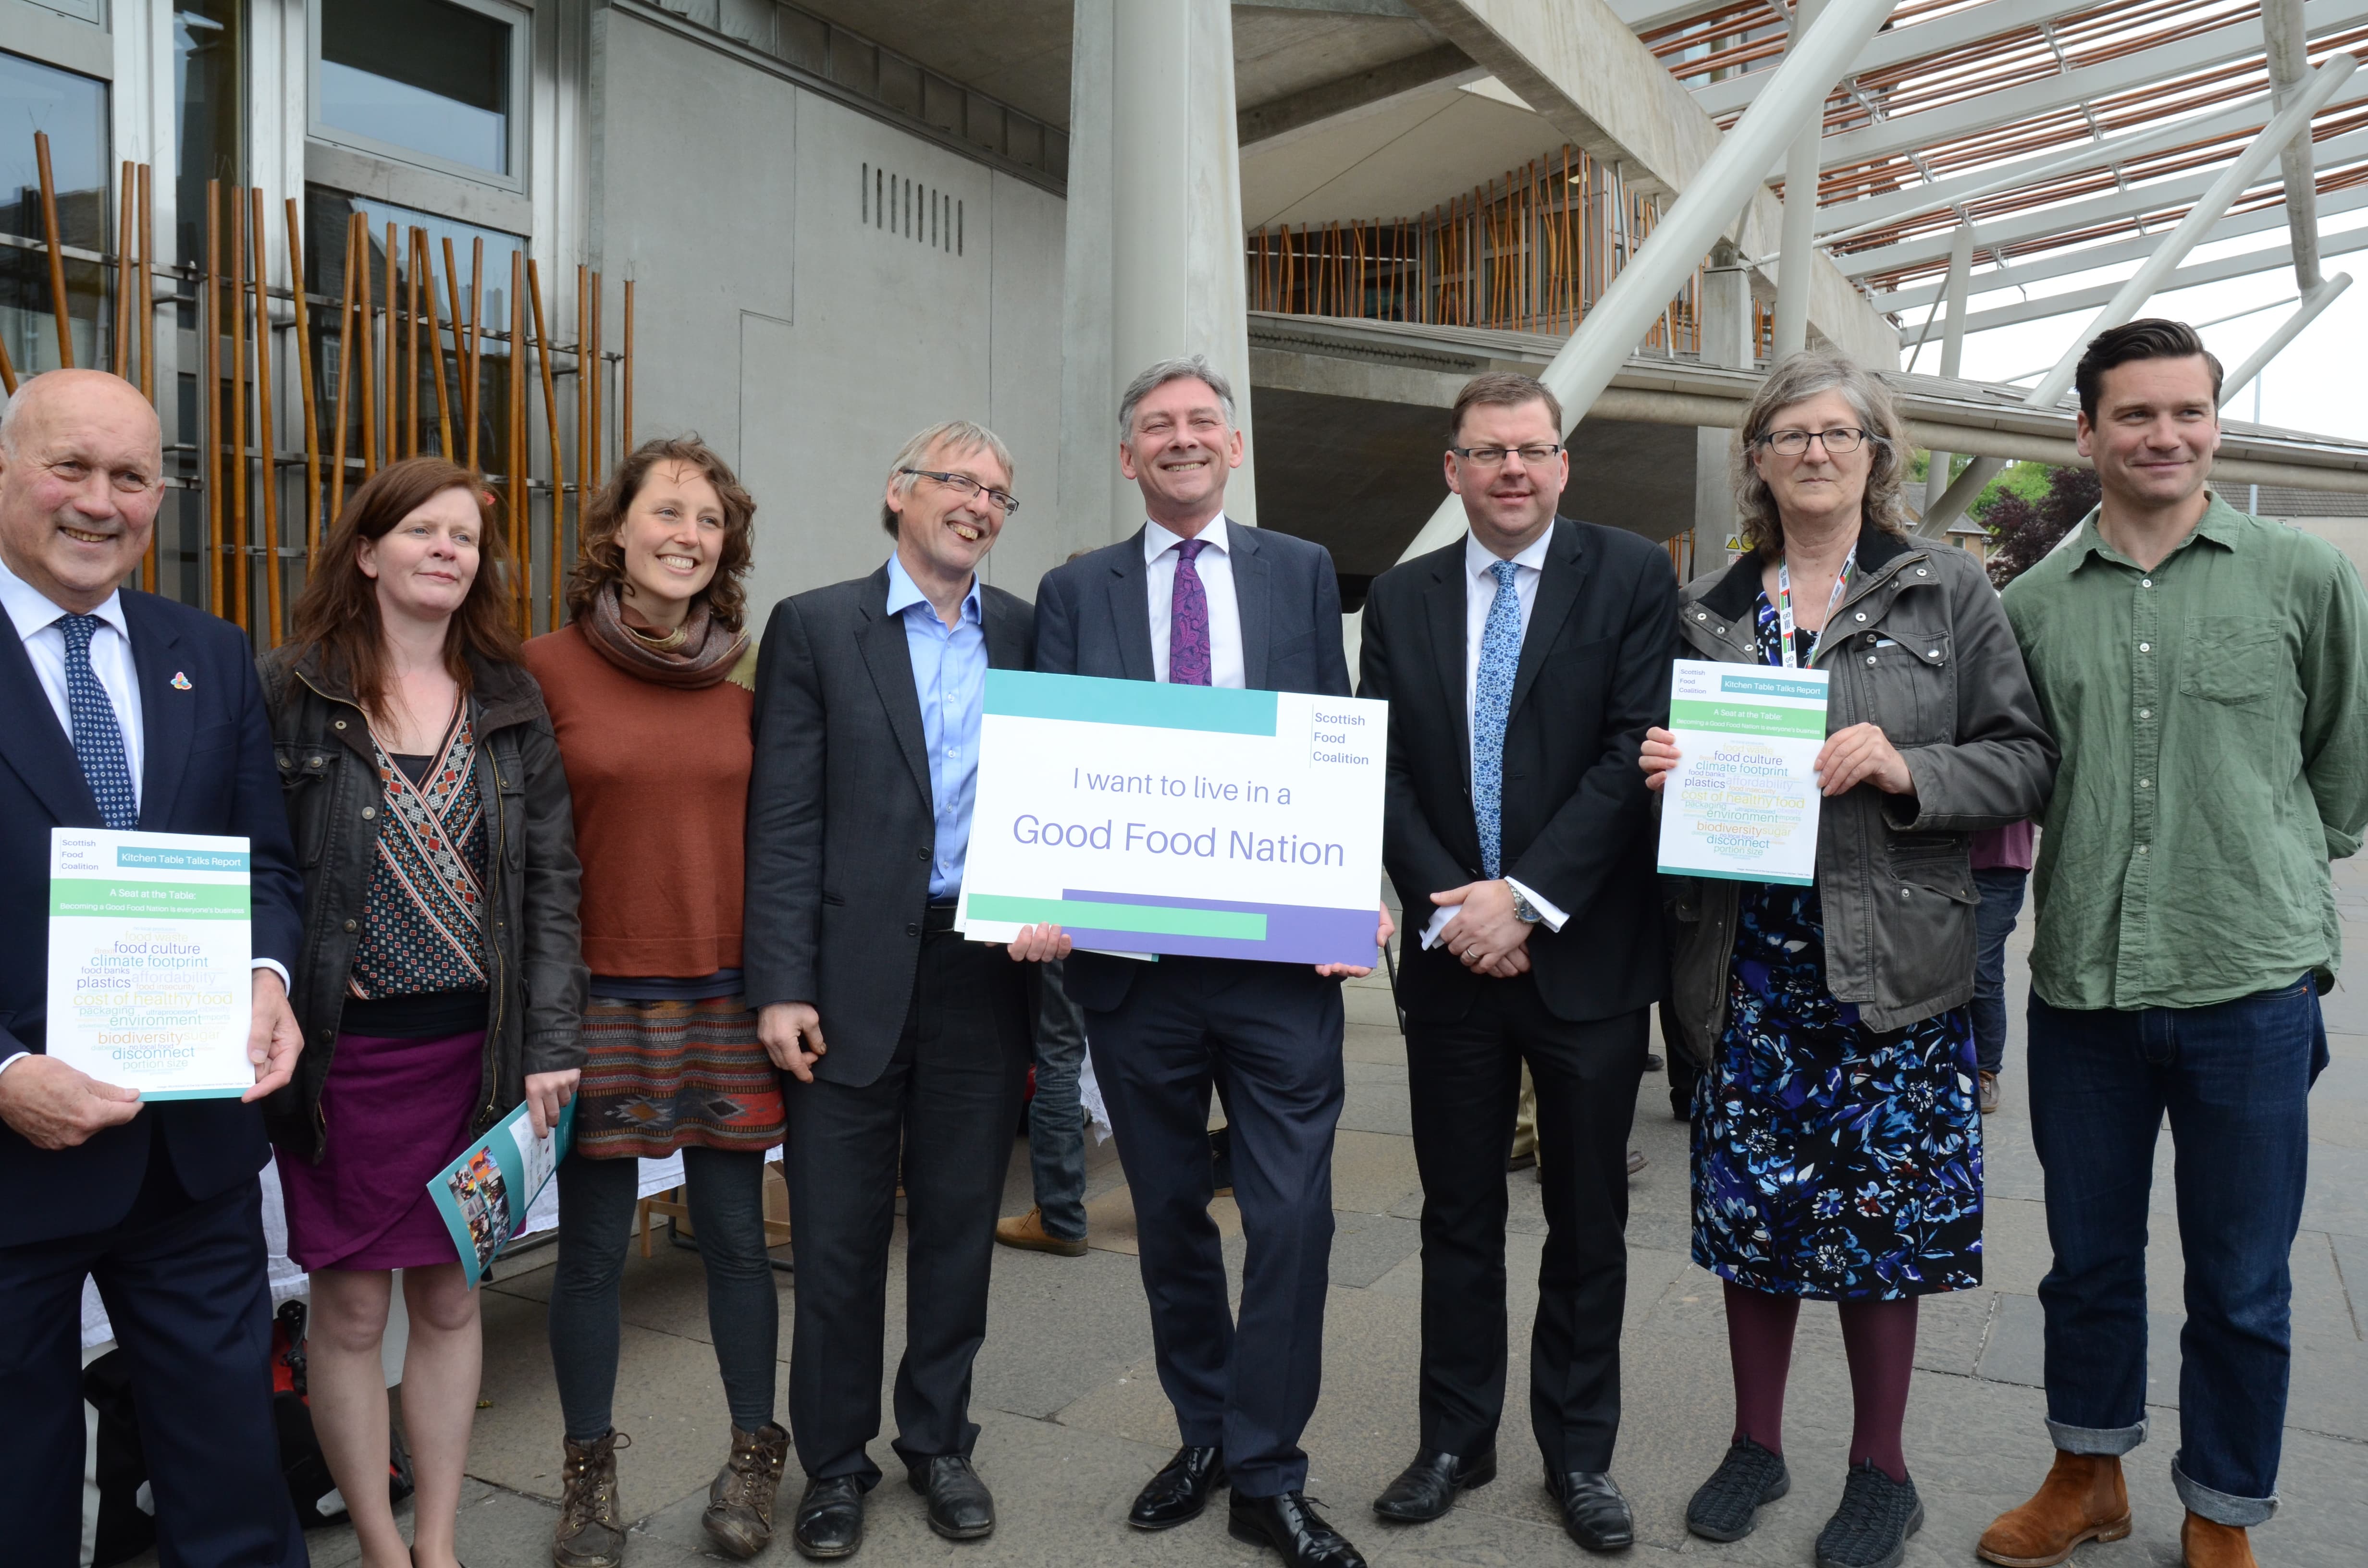 MSPs join campaigners in calling for Scotland to become a Good Food Nation